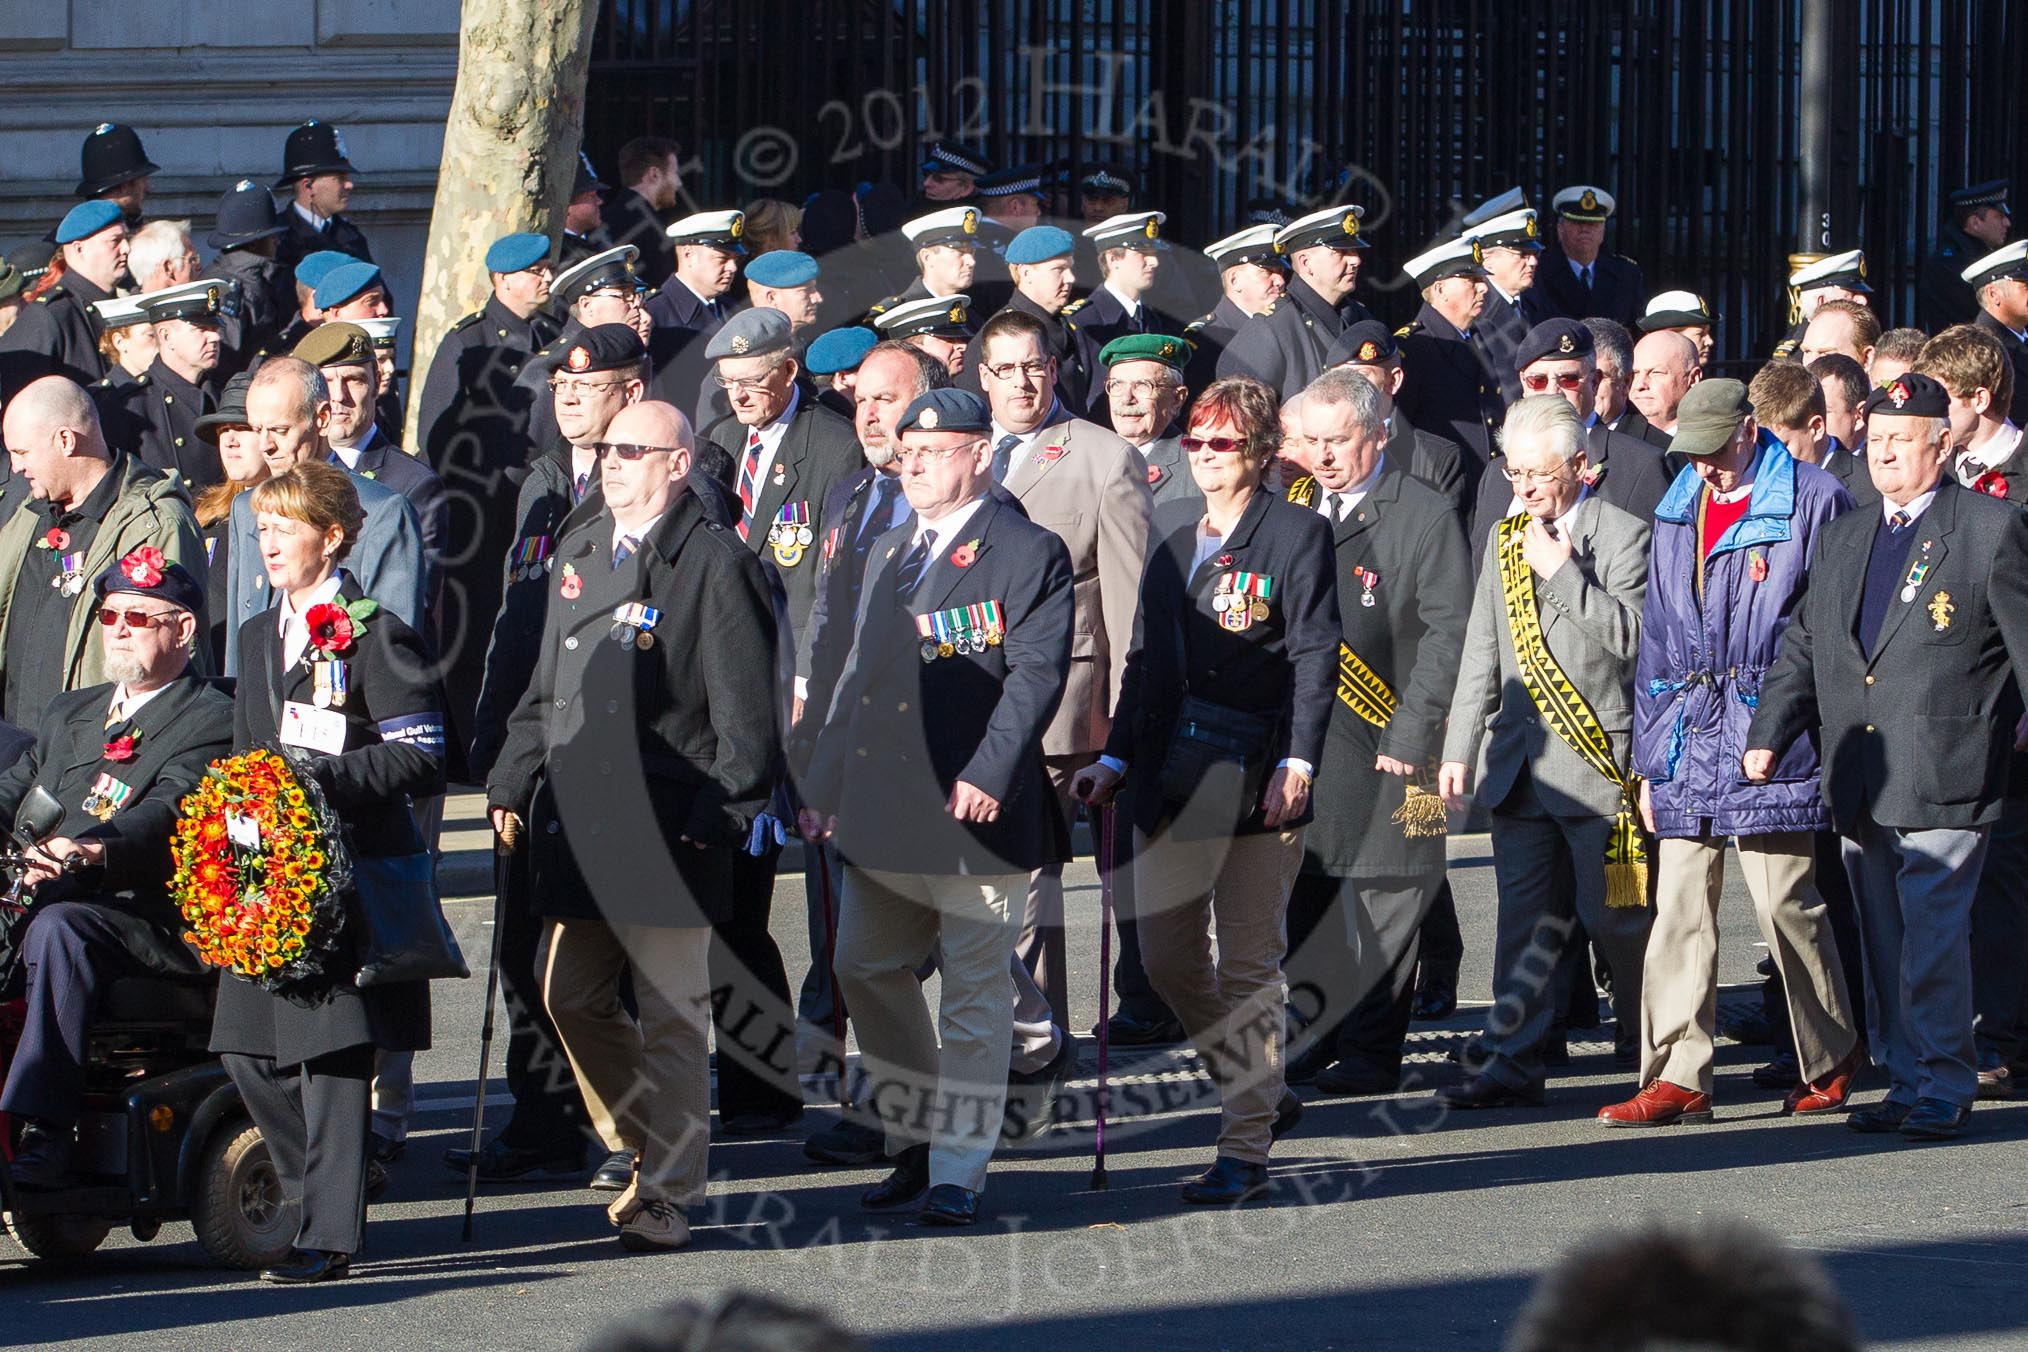 Remembrance Sunday 2012 Cenotaph March Past: Group  F15 - National Gulf Veterans & Families Association..
Whitehall, Cenotaph,
London SW1,

United Kingdom,
on 11 November 2012 at 11:47, image #503